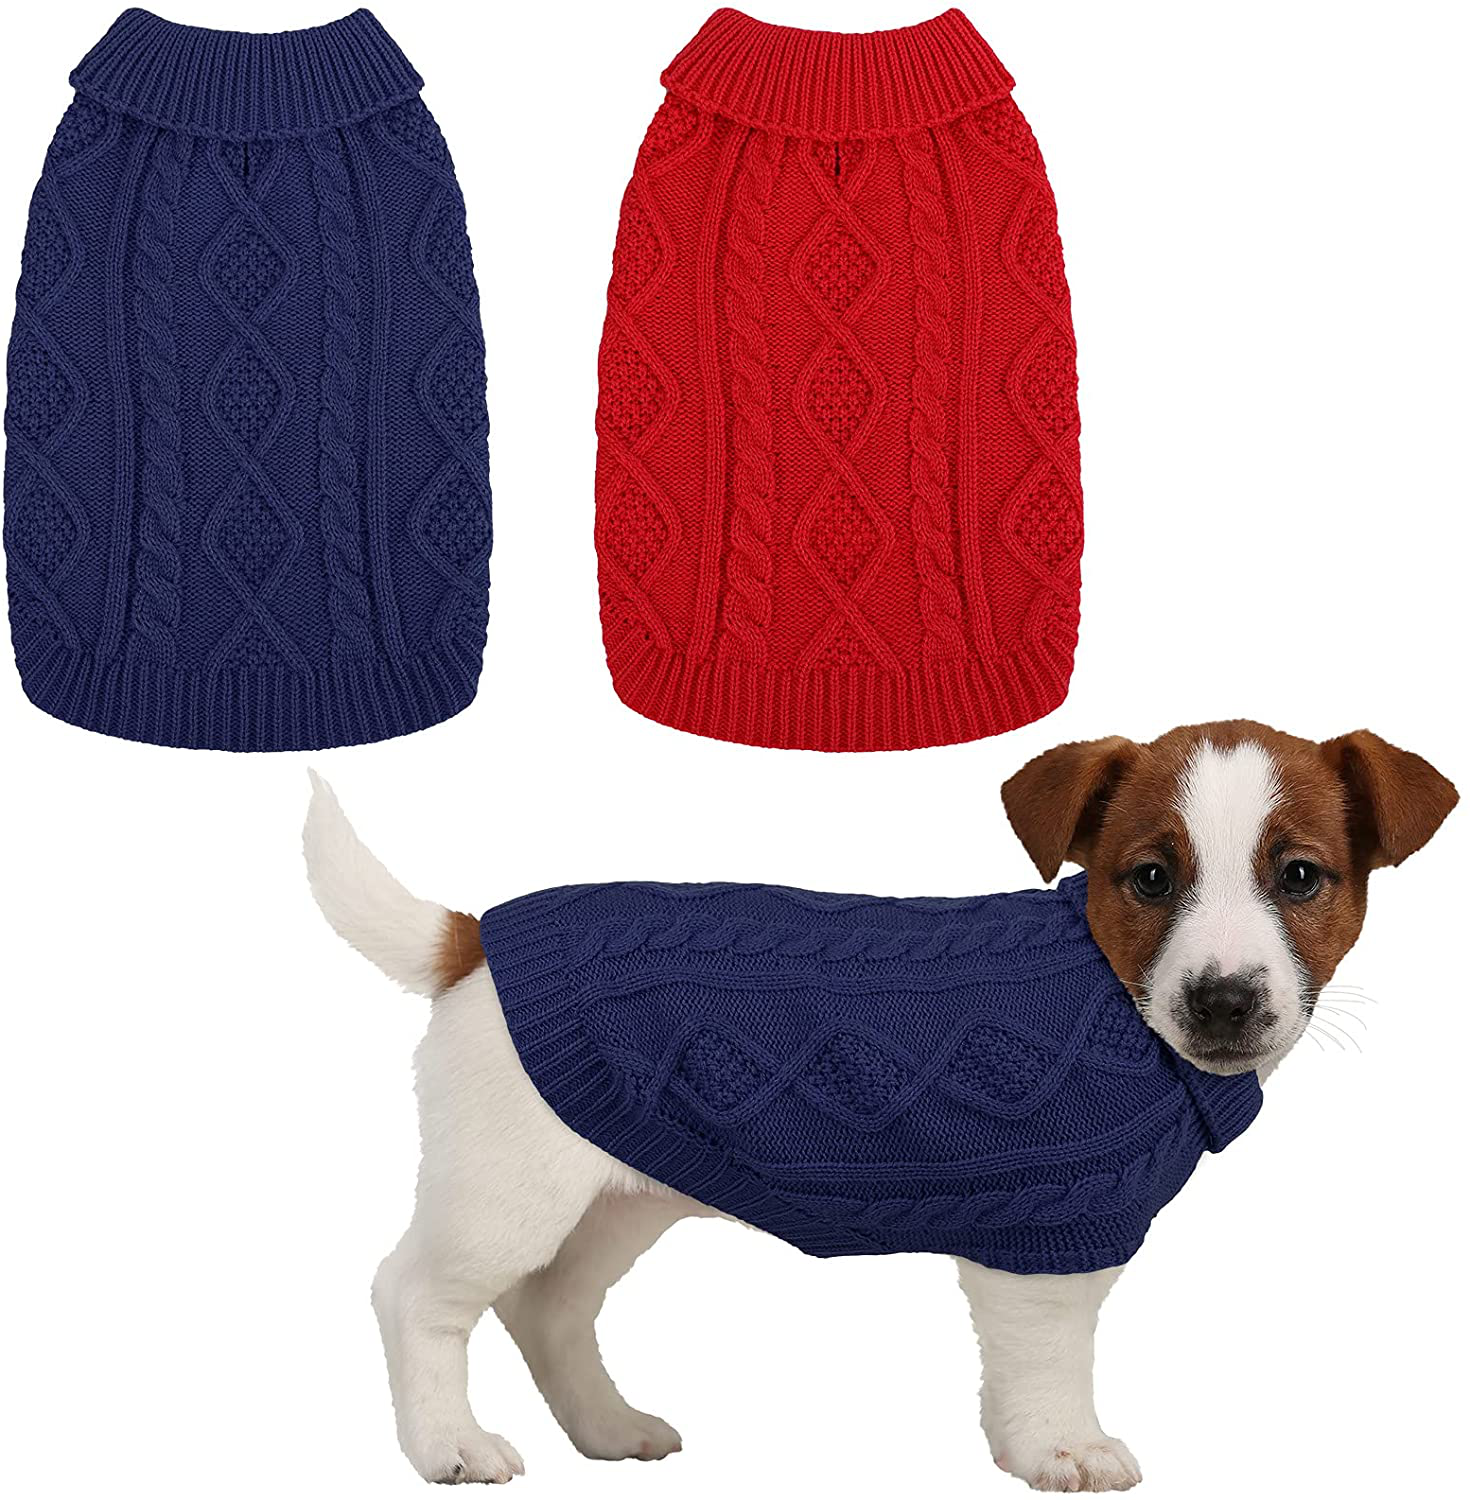 Pedgot Dog Sweater Turtleneck Knitted Dog Sweater Dog Jumper Coat Warm Pet Winter Clothes Classic Cable Knit Sweater for Dogs Cats in Cold Season Animals & Pet Supplies > Pet Supplies > Cat Supplies > Cat Apparel Pedgot Red, Blue Large 